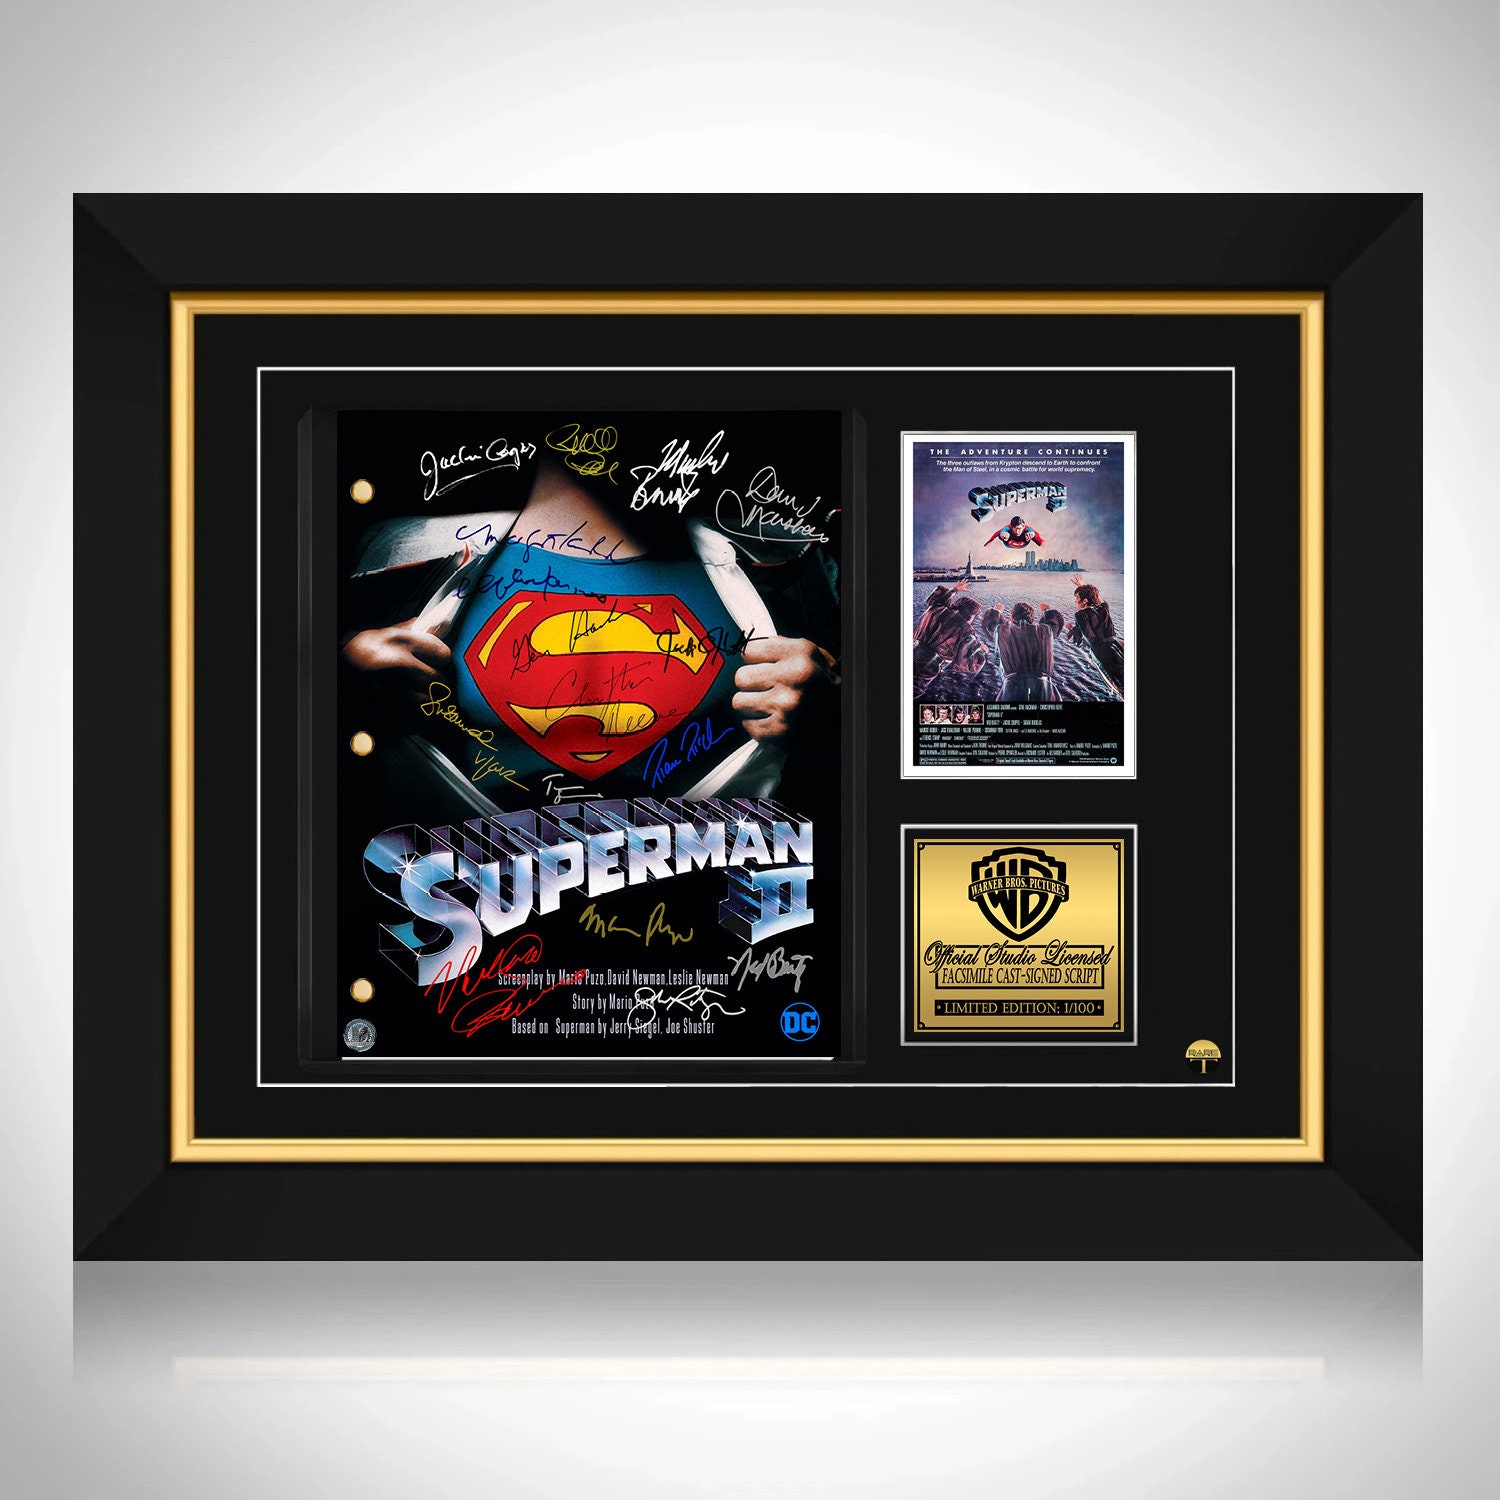  Man Of Steel Super Man Henry Cavill Limited Print Photo Movie  Poster 8x10 #11: Posters & Prints